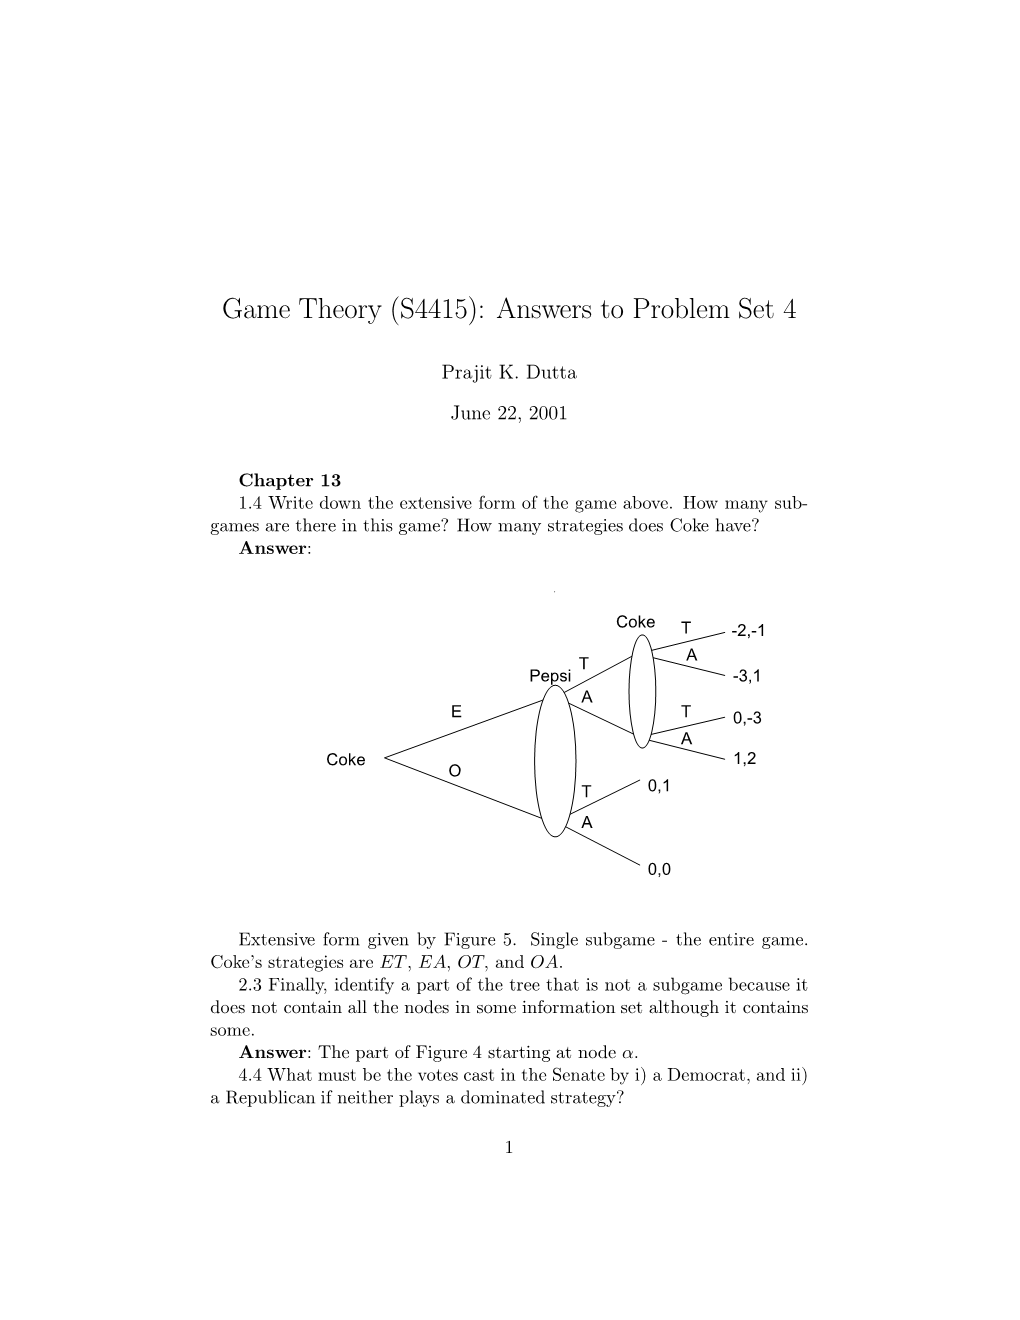 Game Theory (S4415): Answers to Problem Set 4